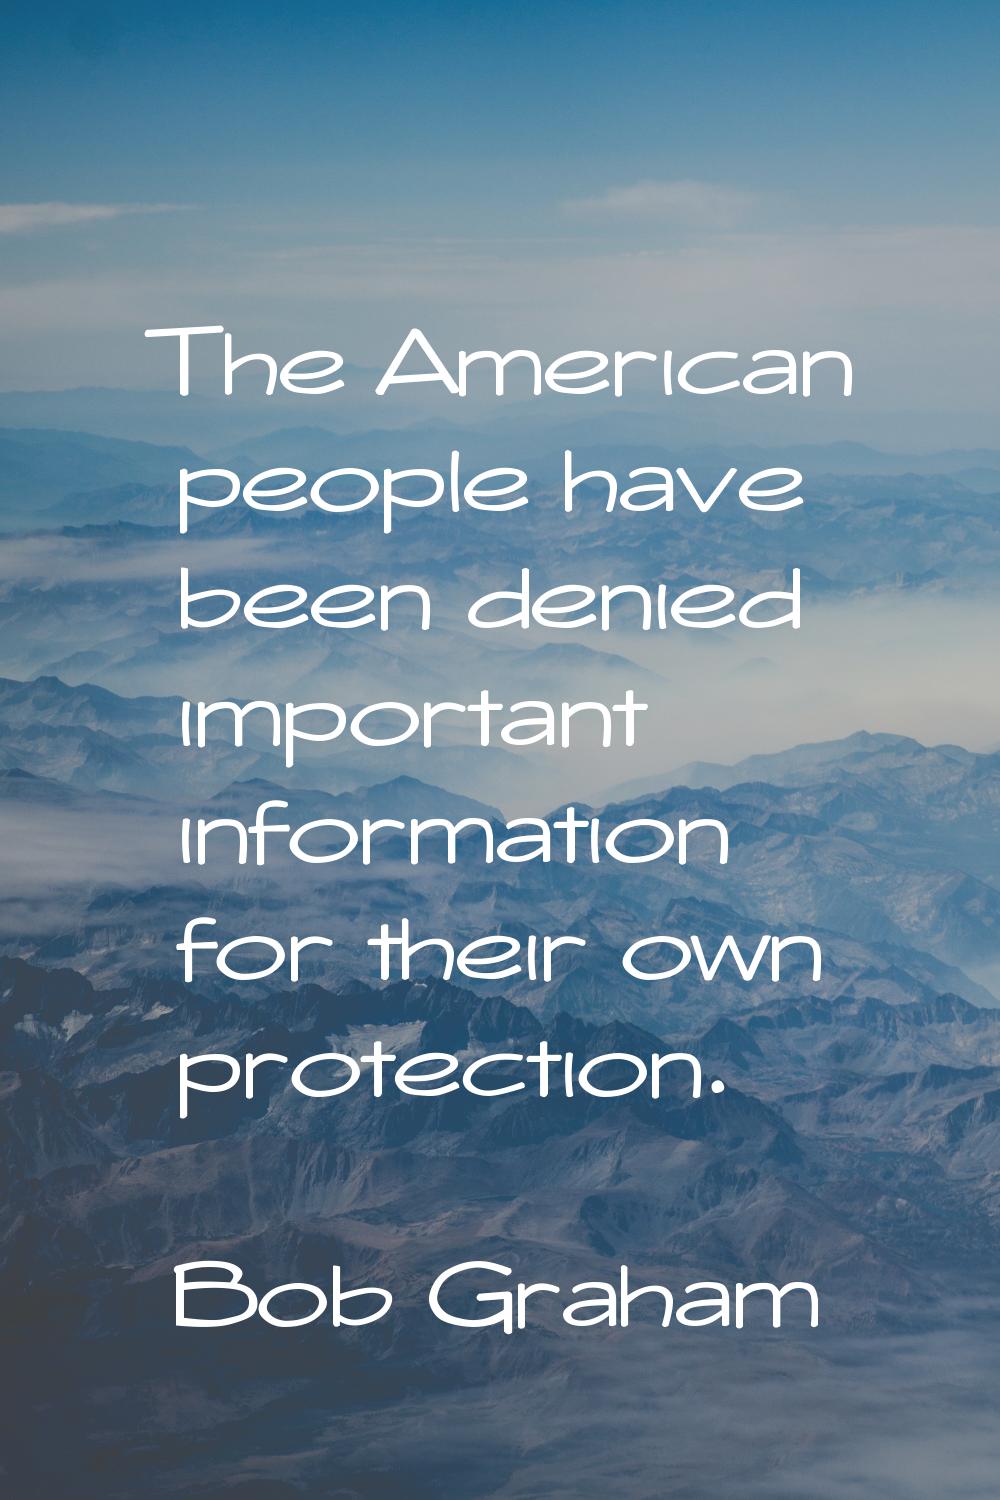 The American people have been denied important information for their own protection.